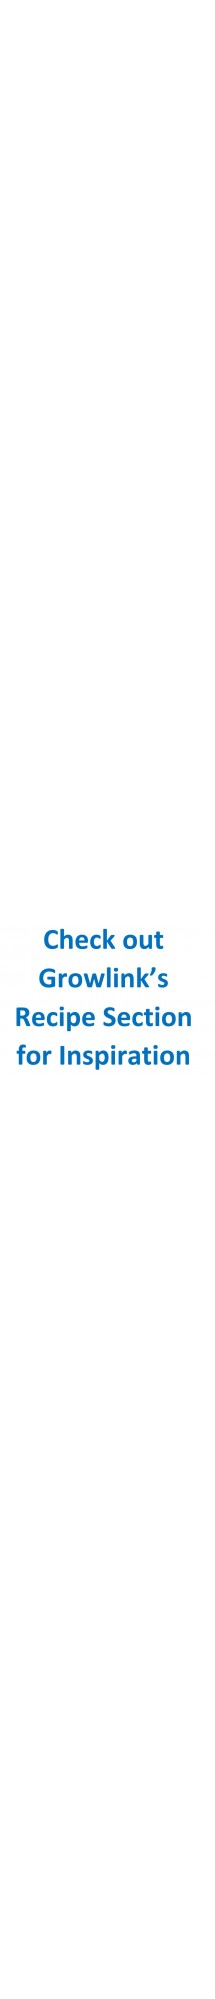 recipe section